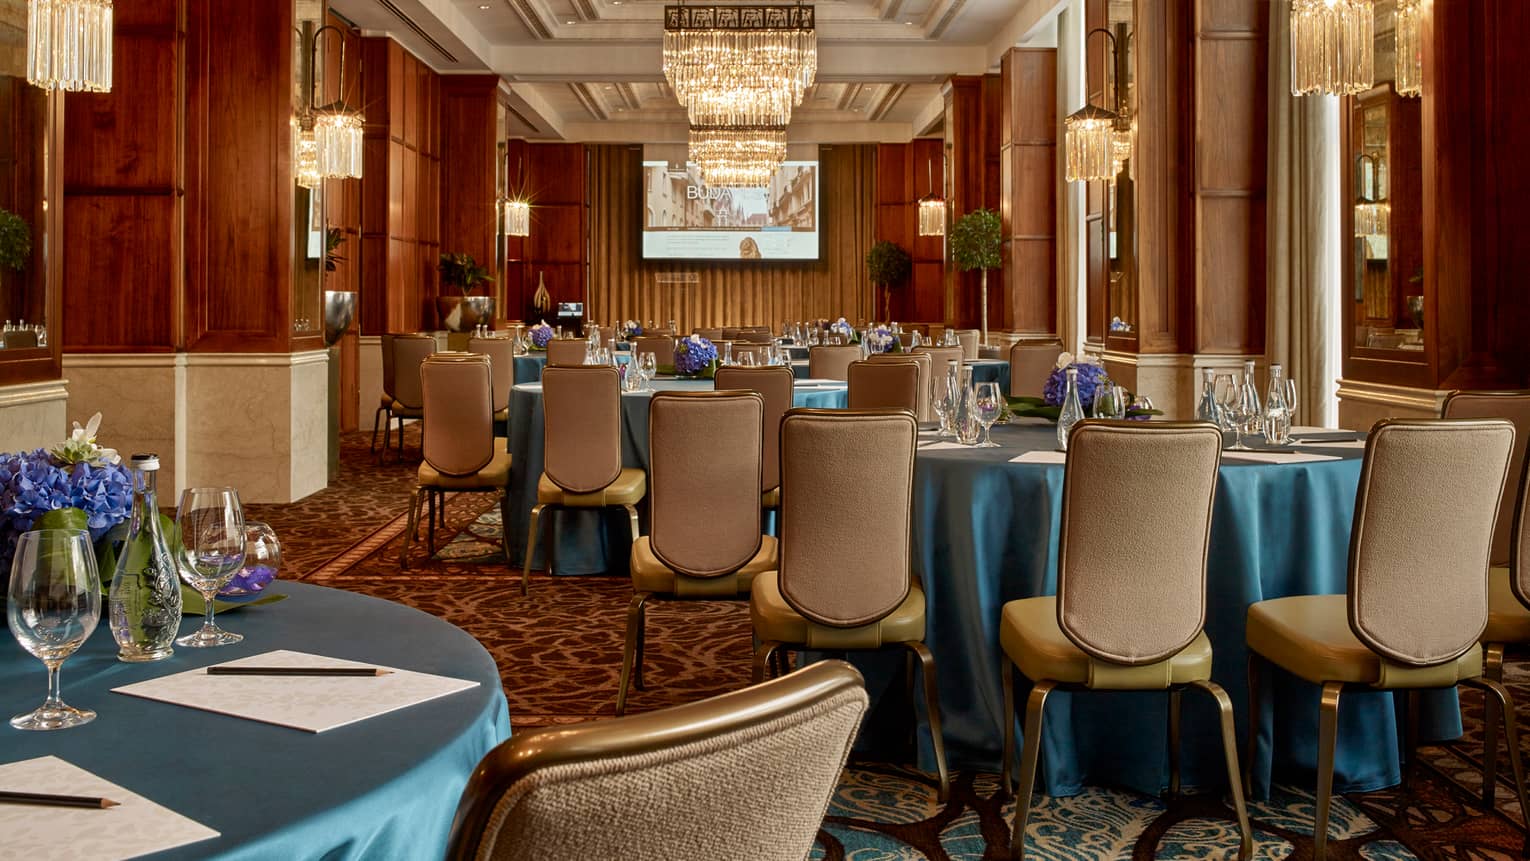 Gresham Room Art Nouveau-style ballroom tables with blue satin tablecloths, leather dining chairs, chandeliers